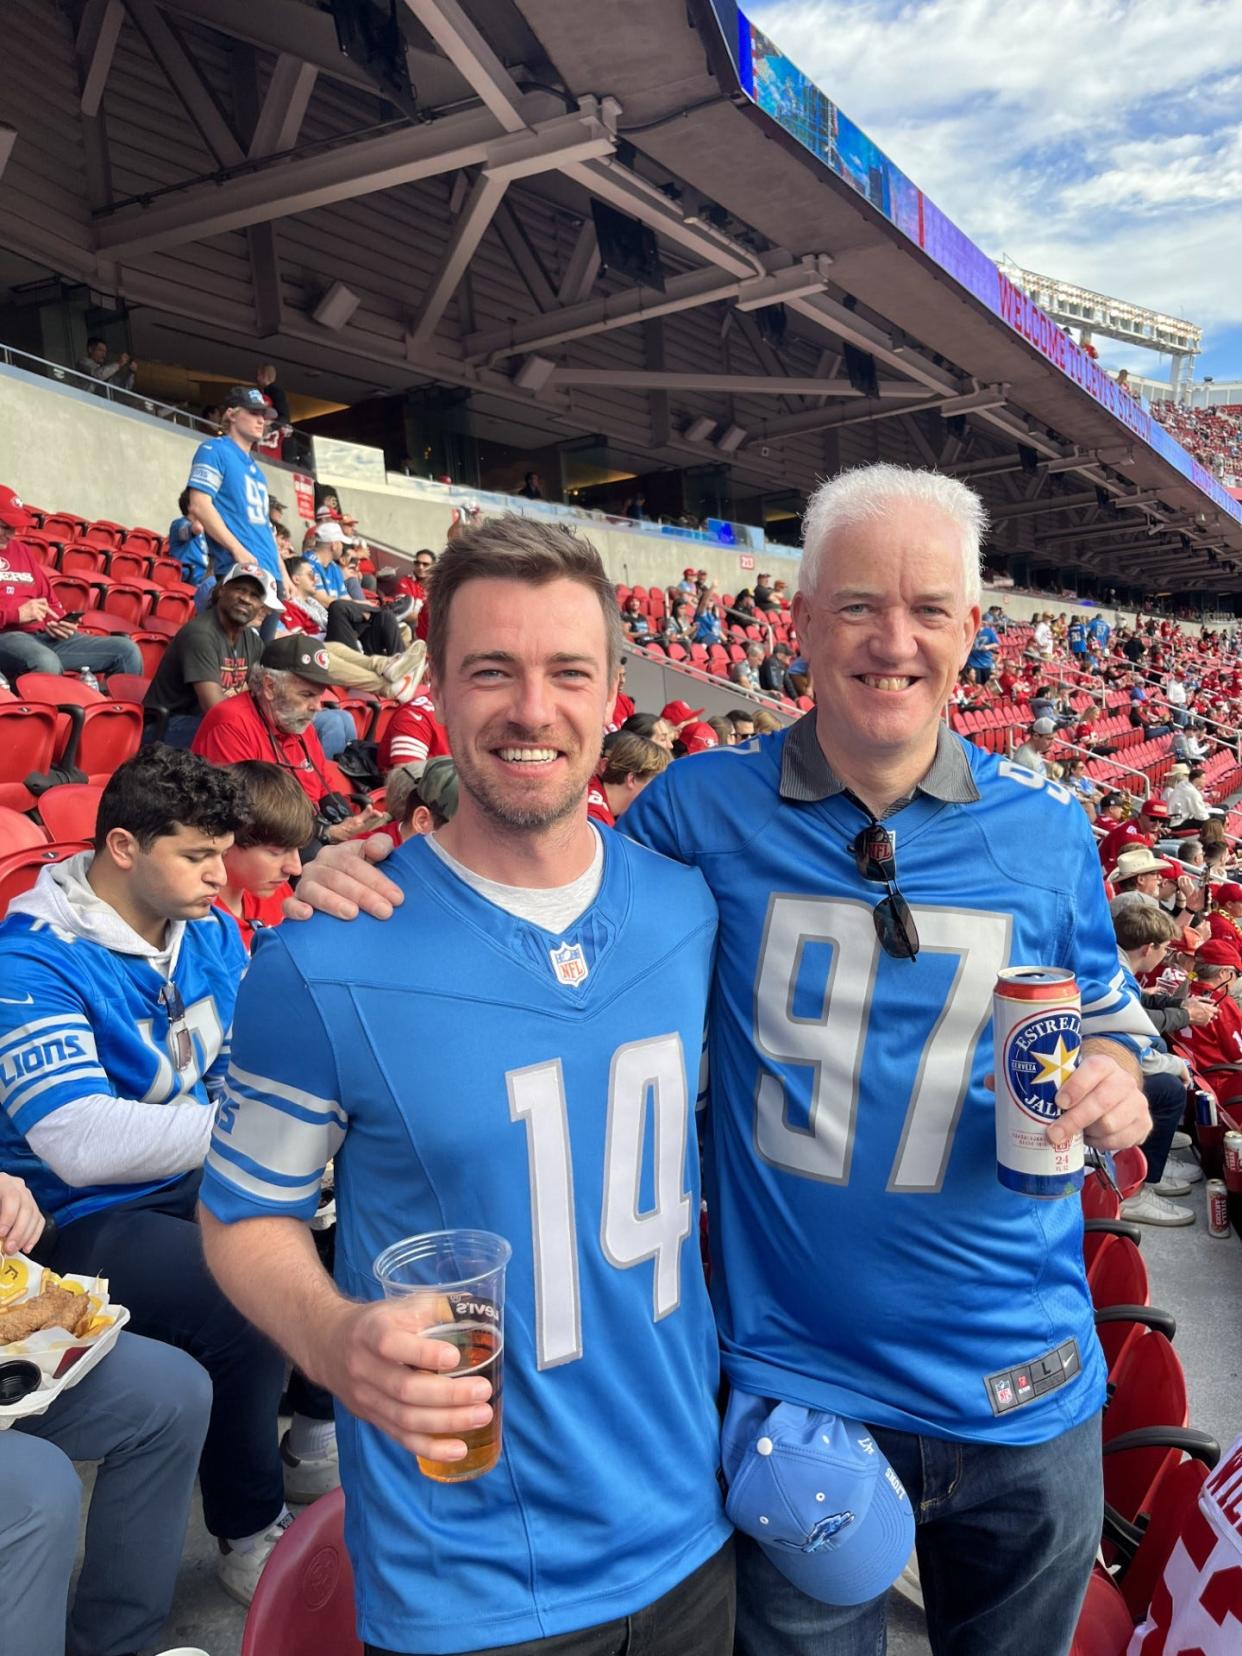 Tim Evans, left, and his son, Gareth, get ready for the NFC championship game in the stands in Levi's Stadium in Santa Clara, California, after traveling from London.